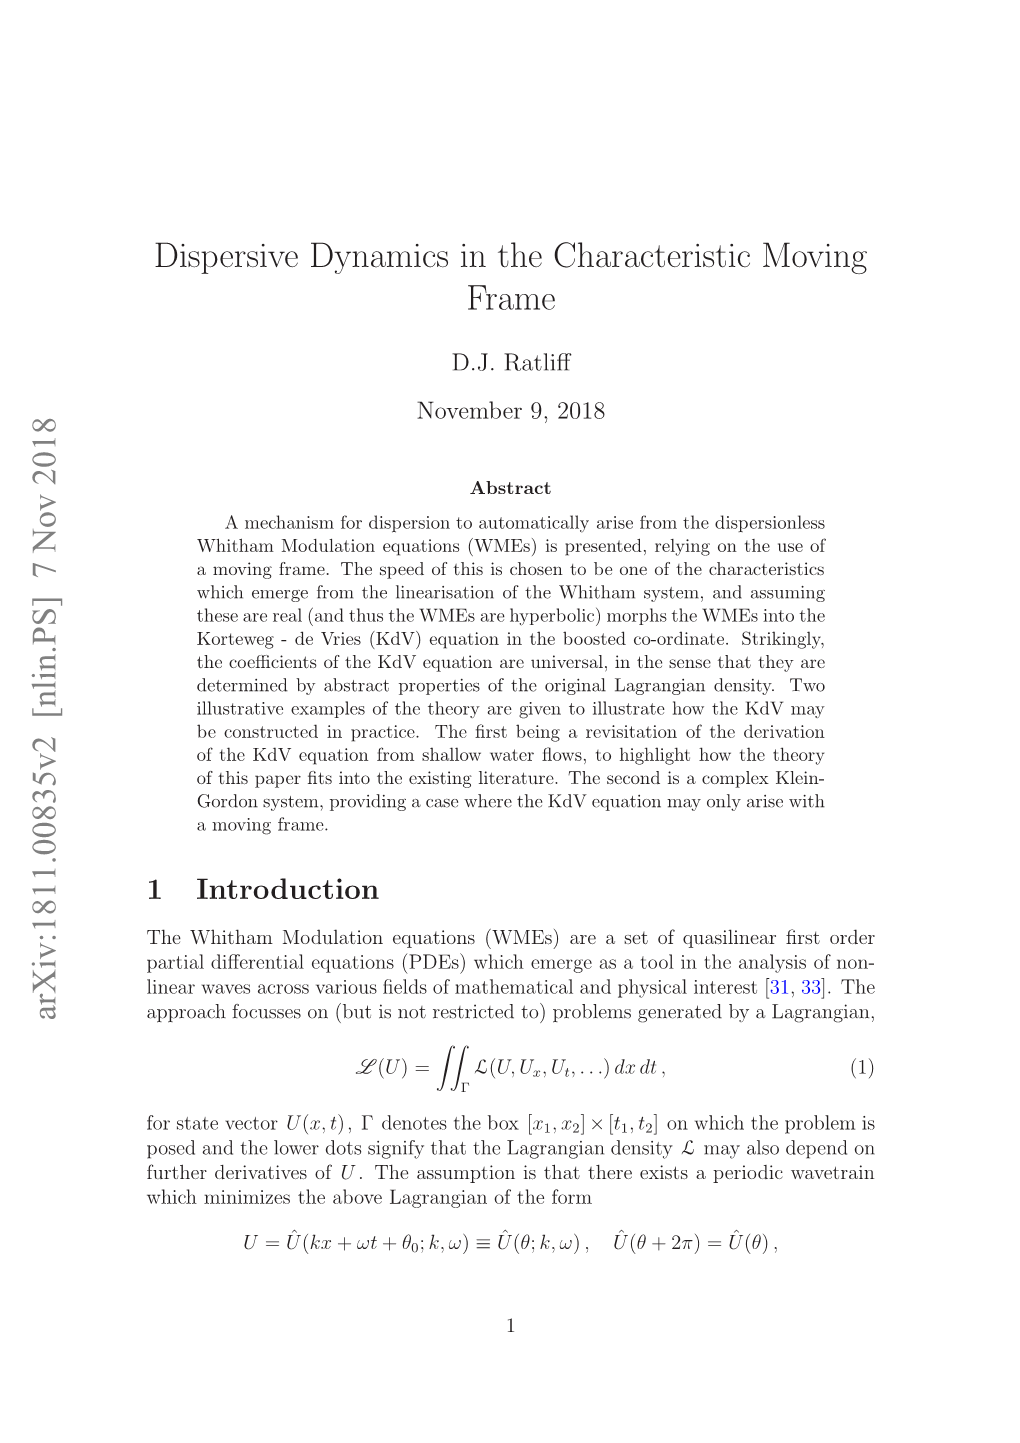 Dispersive Dynamics in the Characteristic Moving Frame